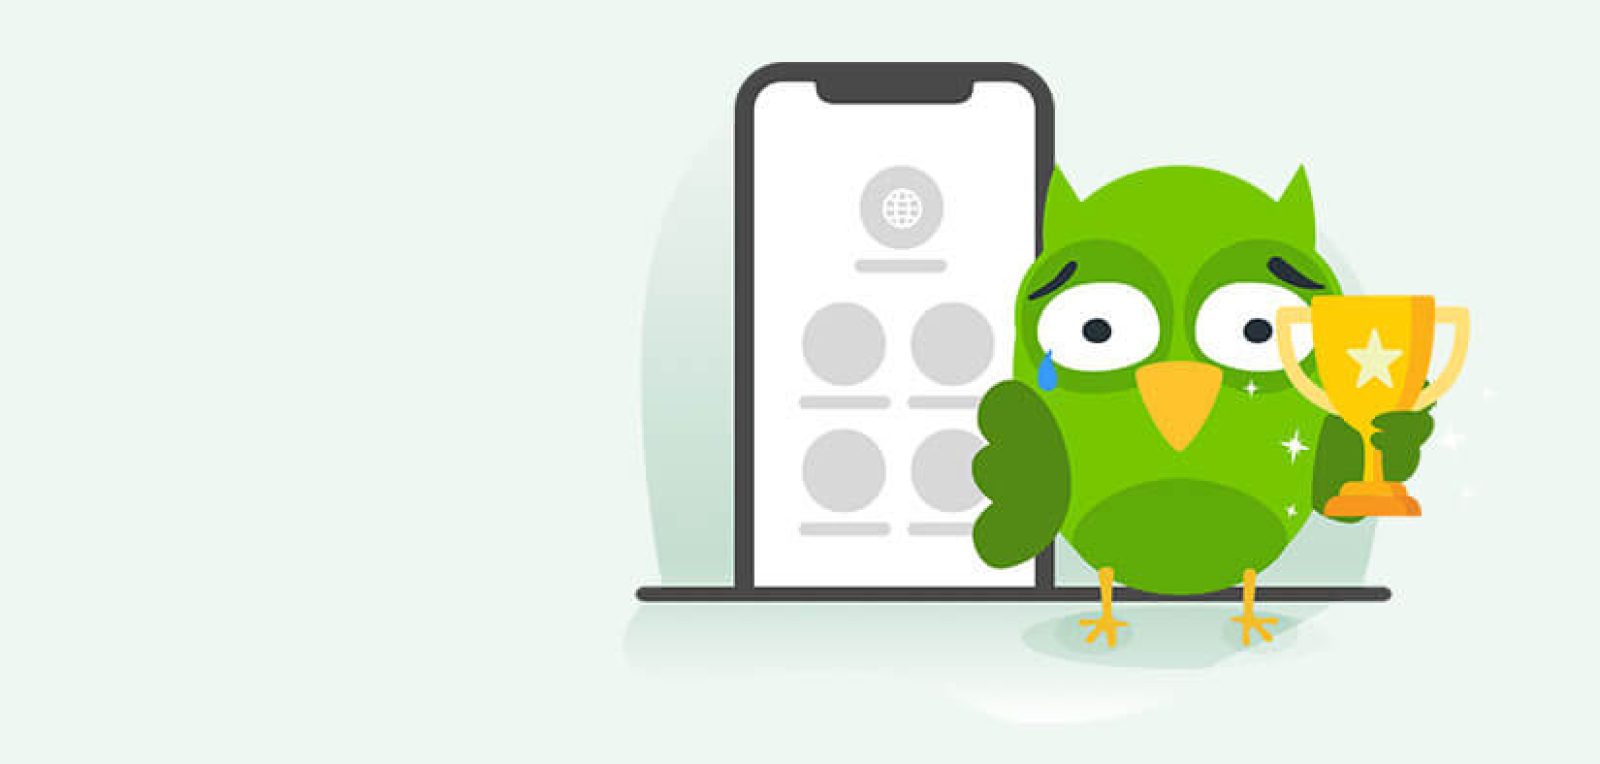 No Progress With Duolingo? Here's What the Owl Gets Wrong